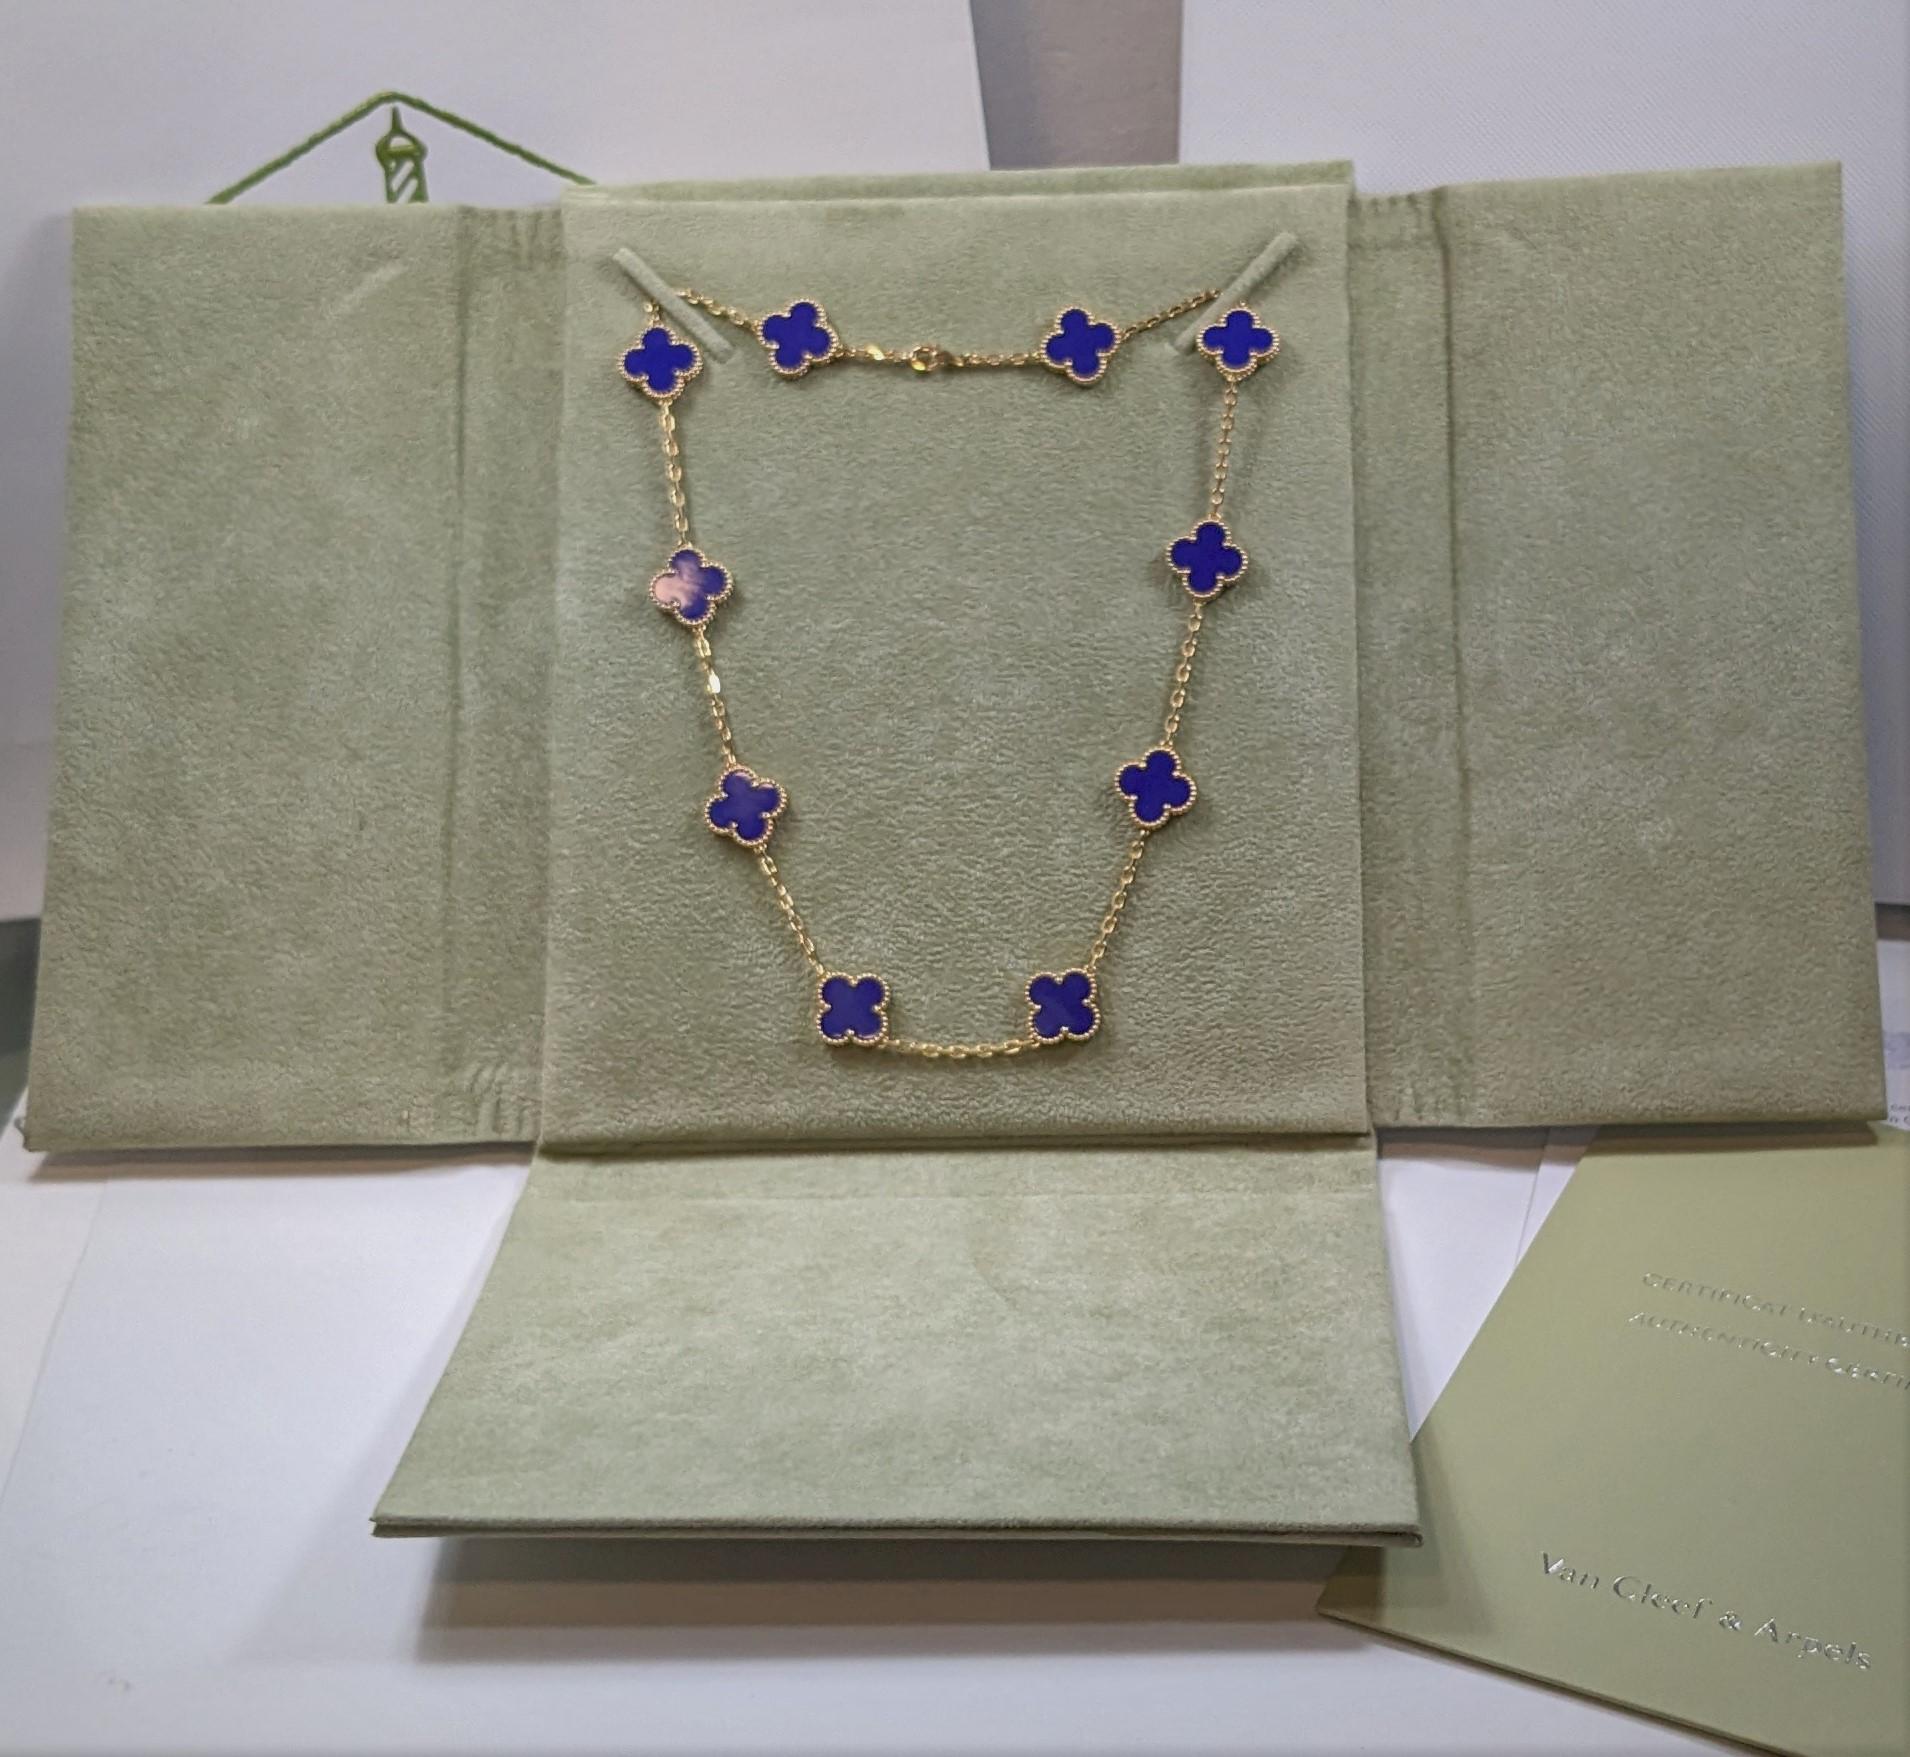 This classic vintage Van Cleef & Arpels necklace is crafted in 18k yellow gold and features 10 lucky clover motifs inlaid with blue agate in round bead settings. Made in France. Measurements: 0.59